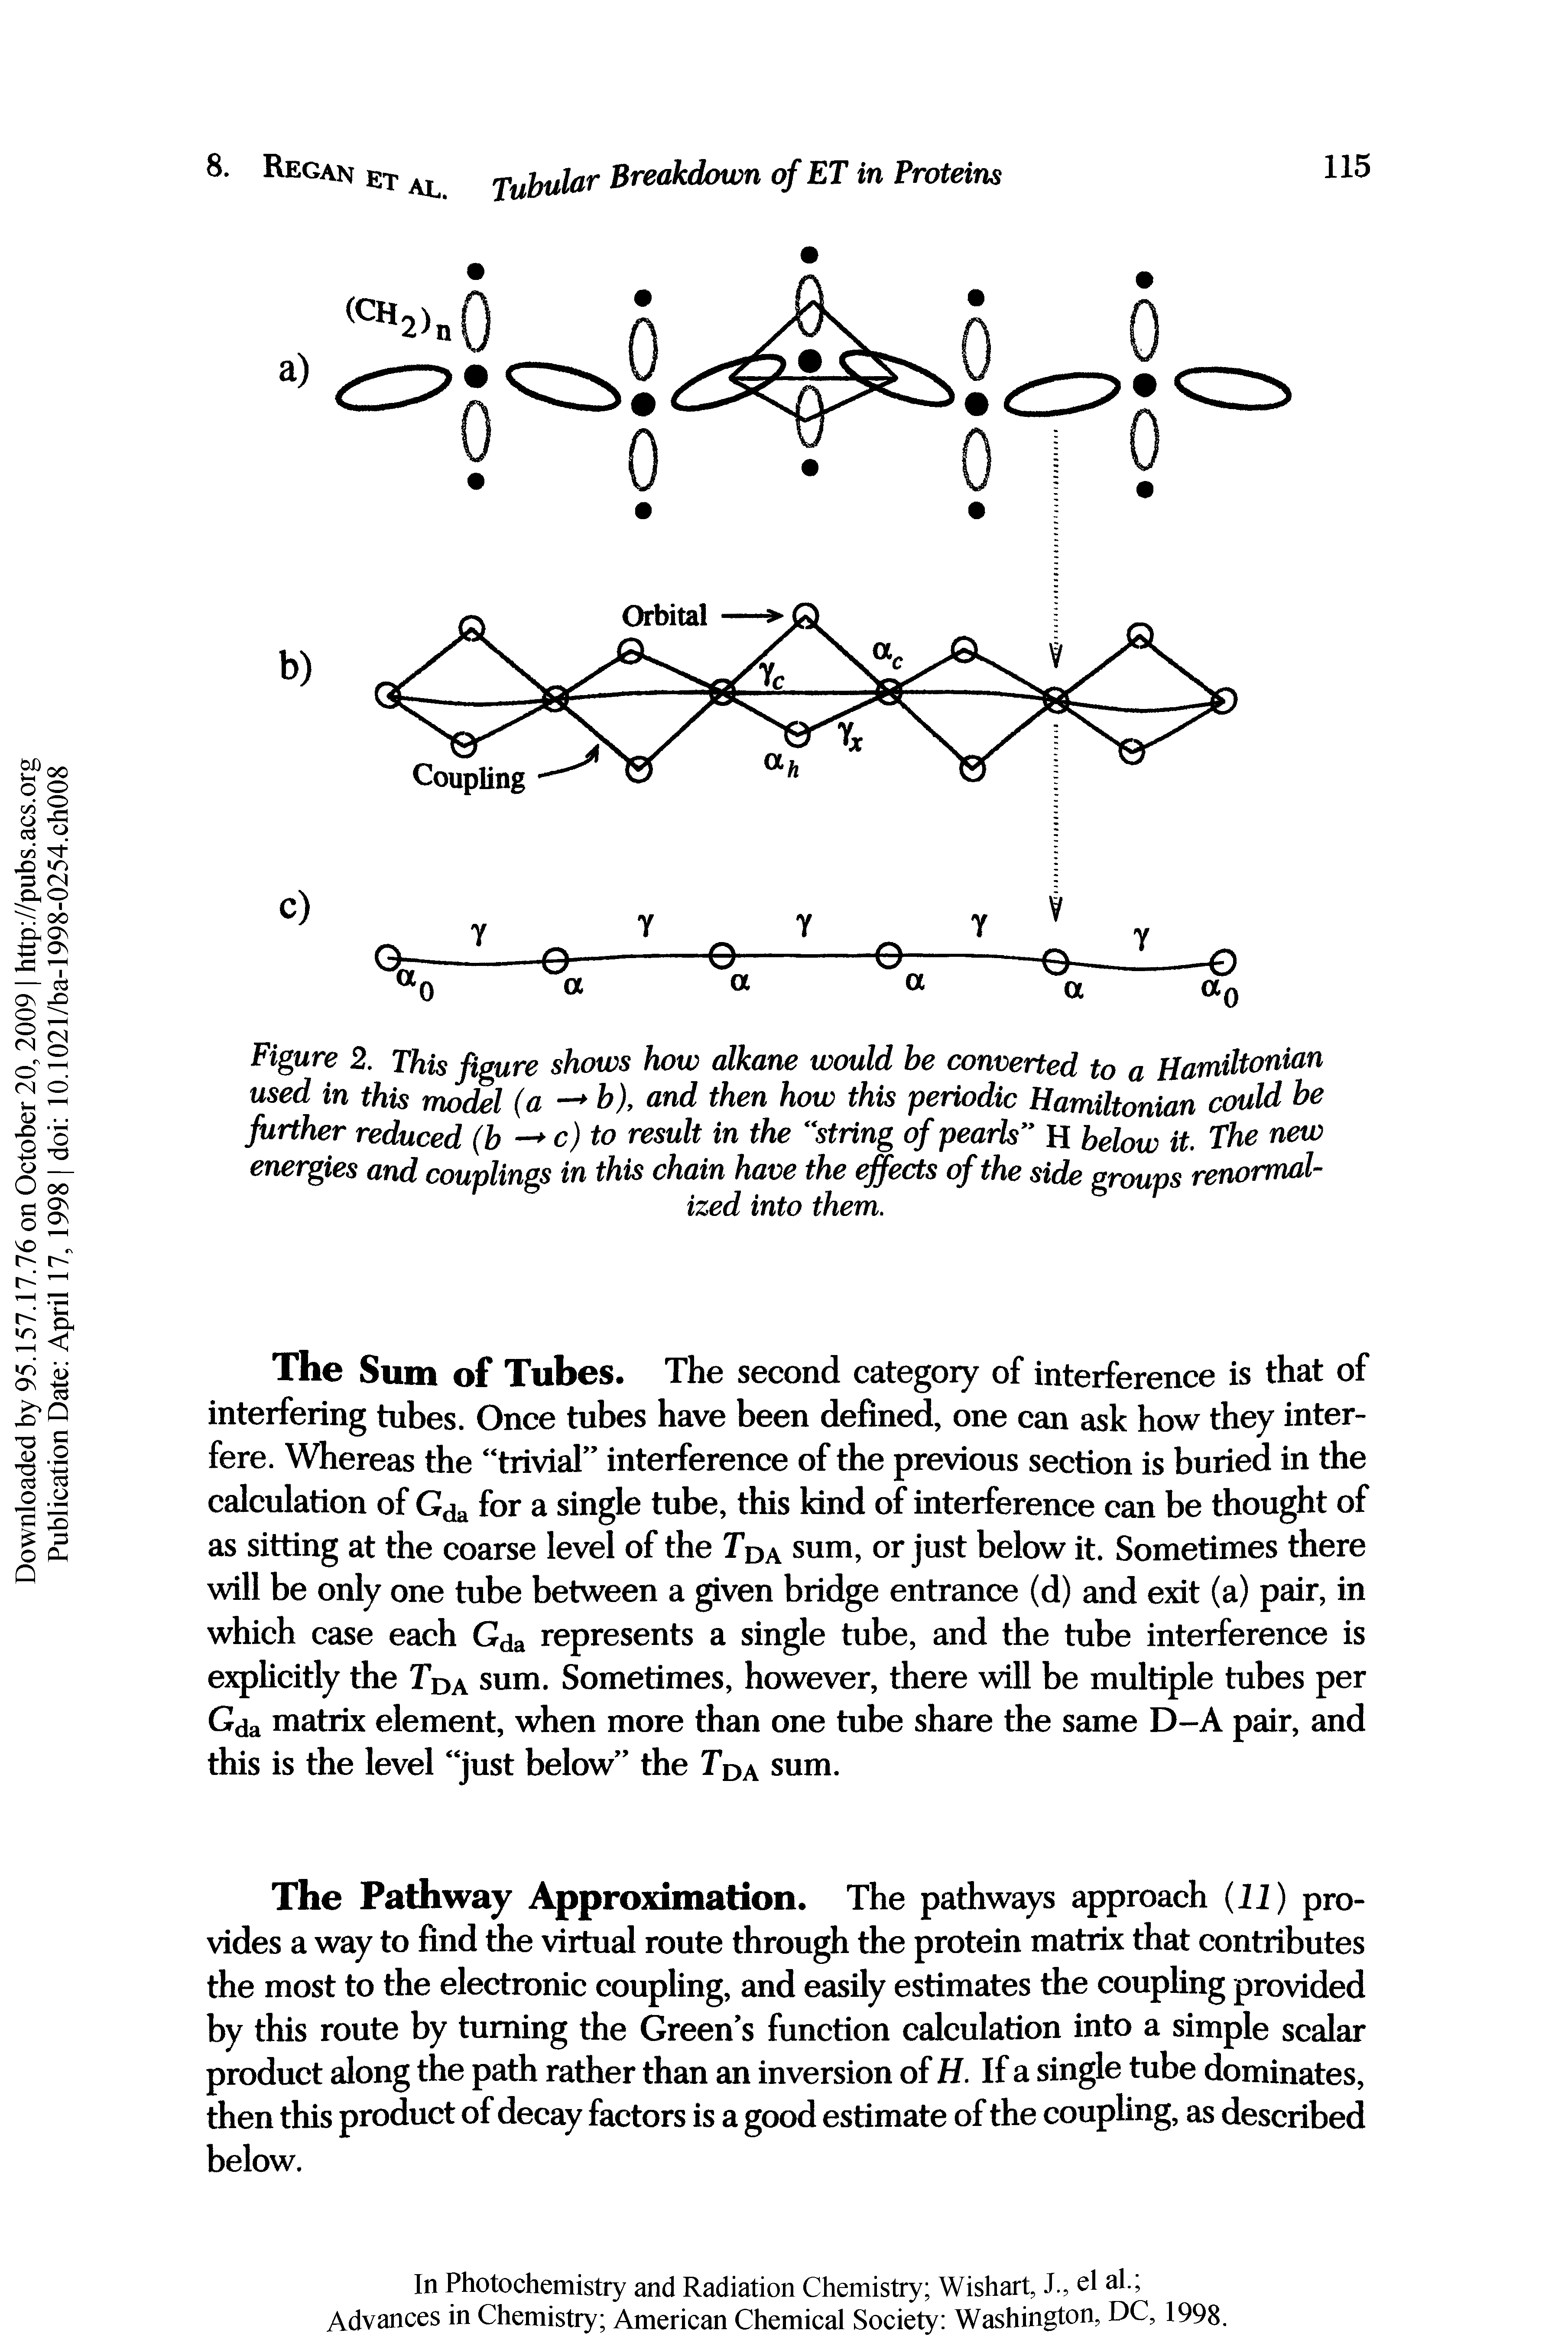 Figure 2. This figure shows how alkane would be converted to a Hamiltonian used in this model (a — b), and then how this periodic Hamiltonian could be further reduced (b c) to result in the "string of pearls" H below it. The new energies and couplings in this chain have the effects of the side groups renorrml-...